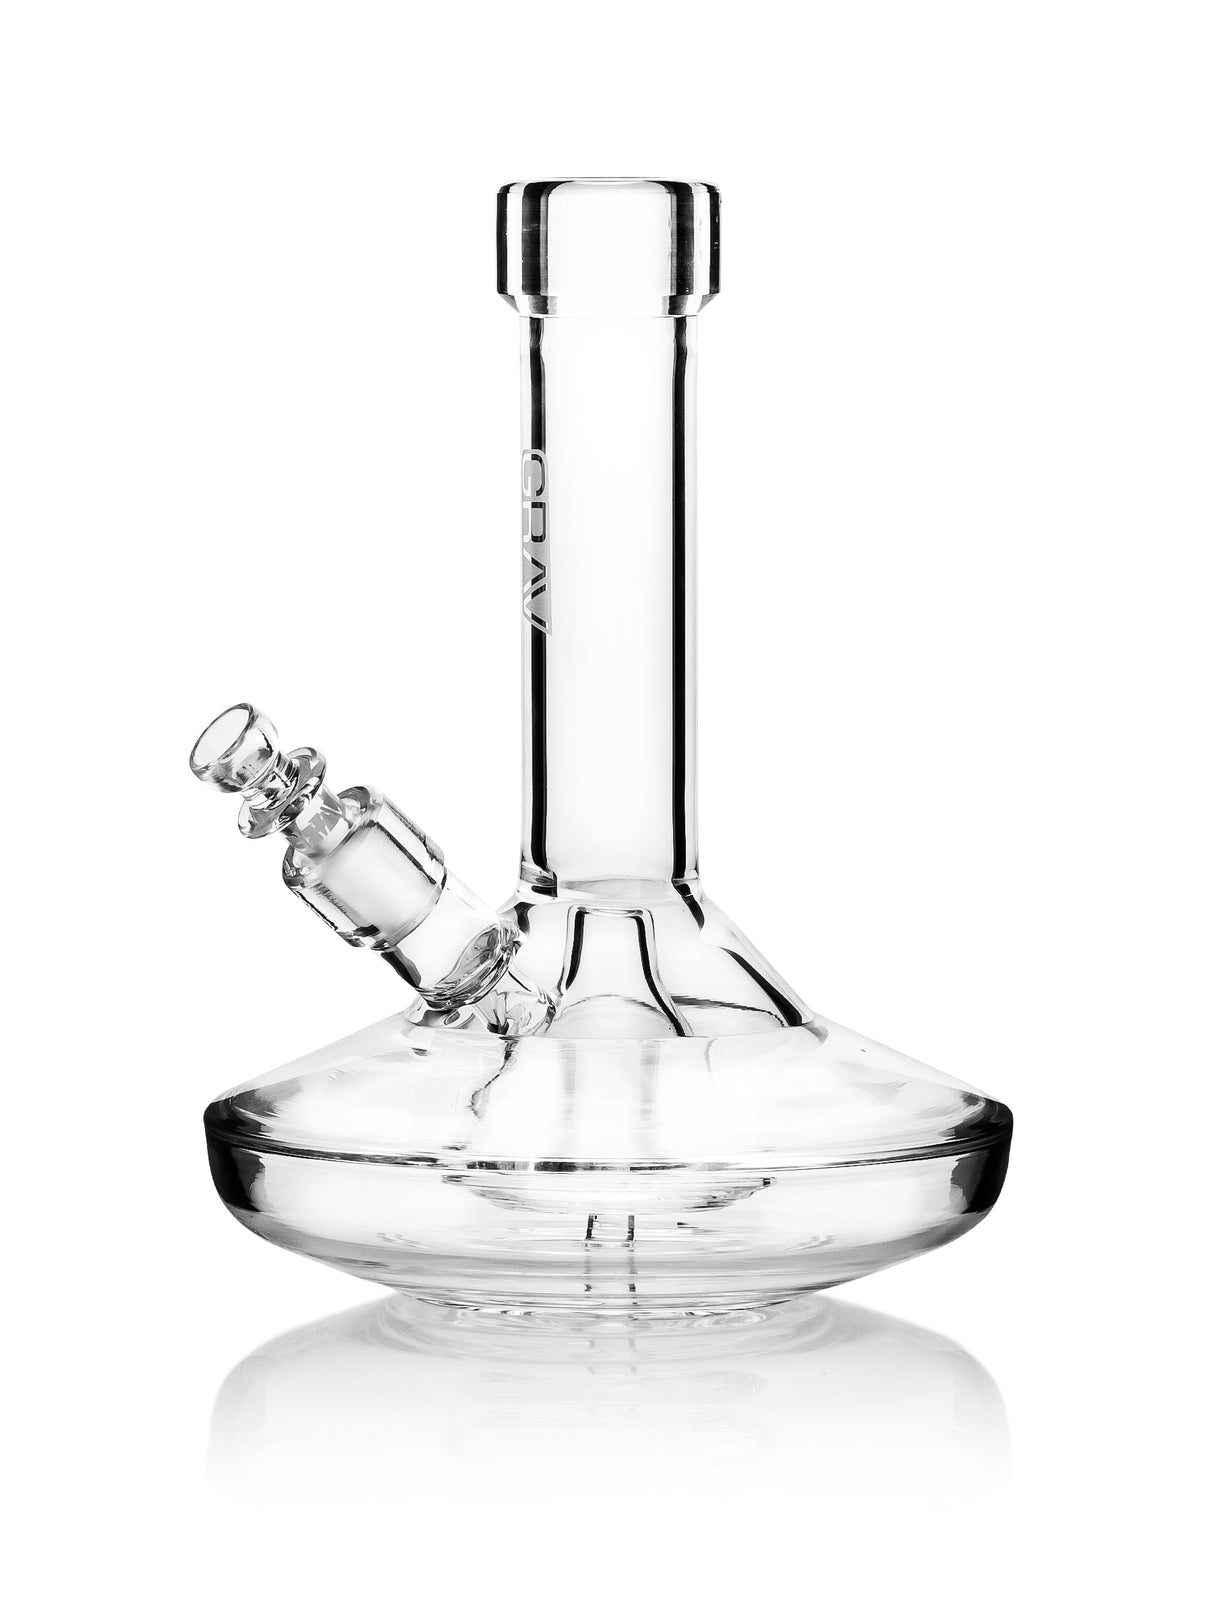 How To Pack A Bowl The Right Way - World of Bongs